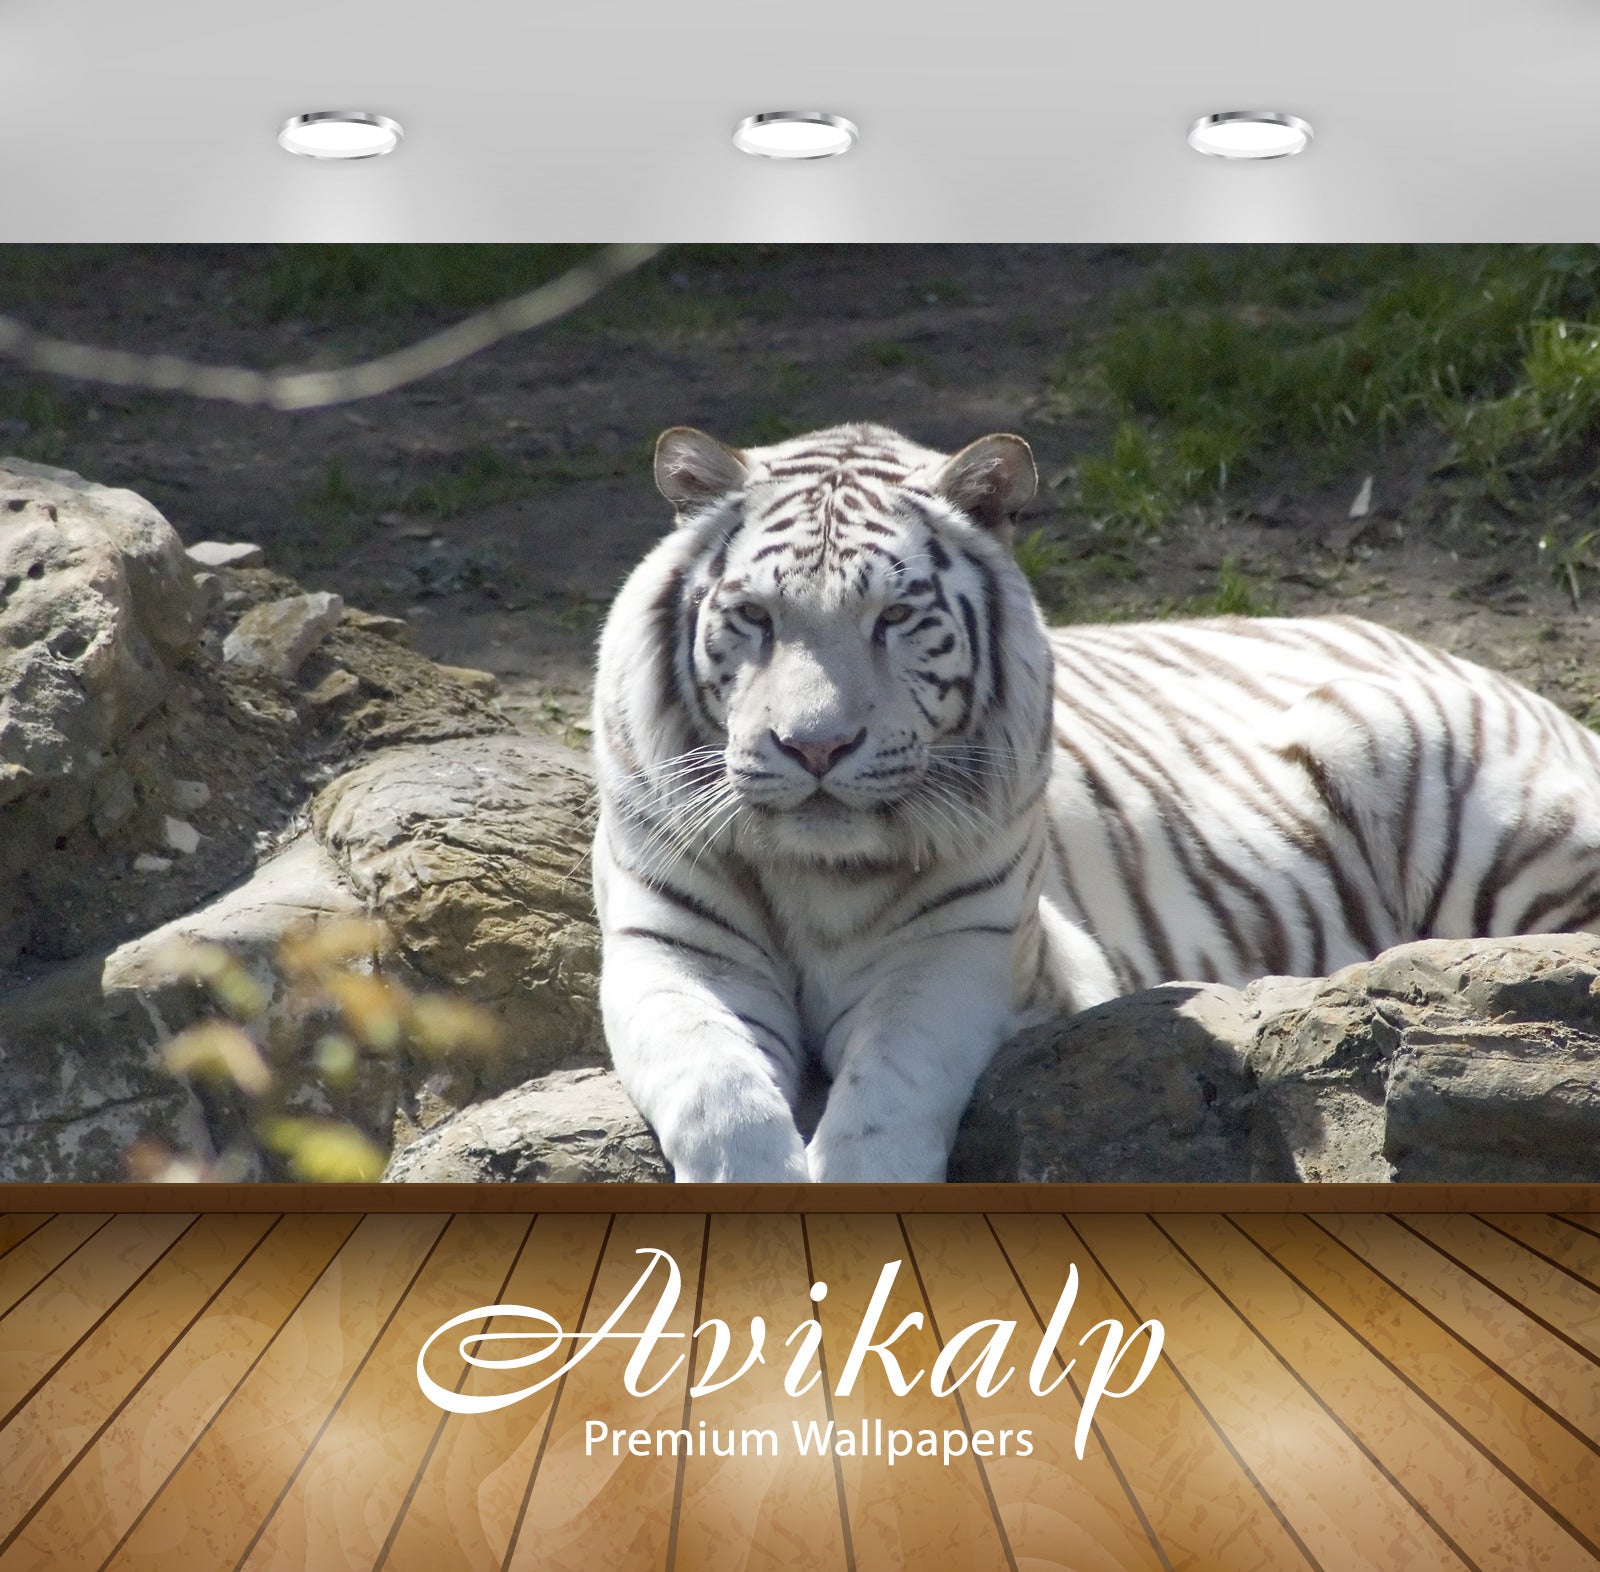 Avikalp Exclusive Awi1822 Tiger Full HD Wallpapers for Living room, Hall, Kids Room, Kitchen, TV Bac